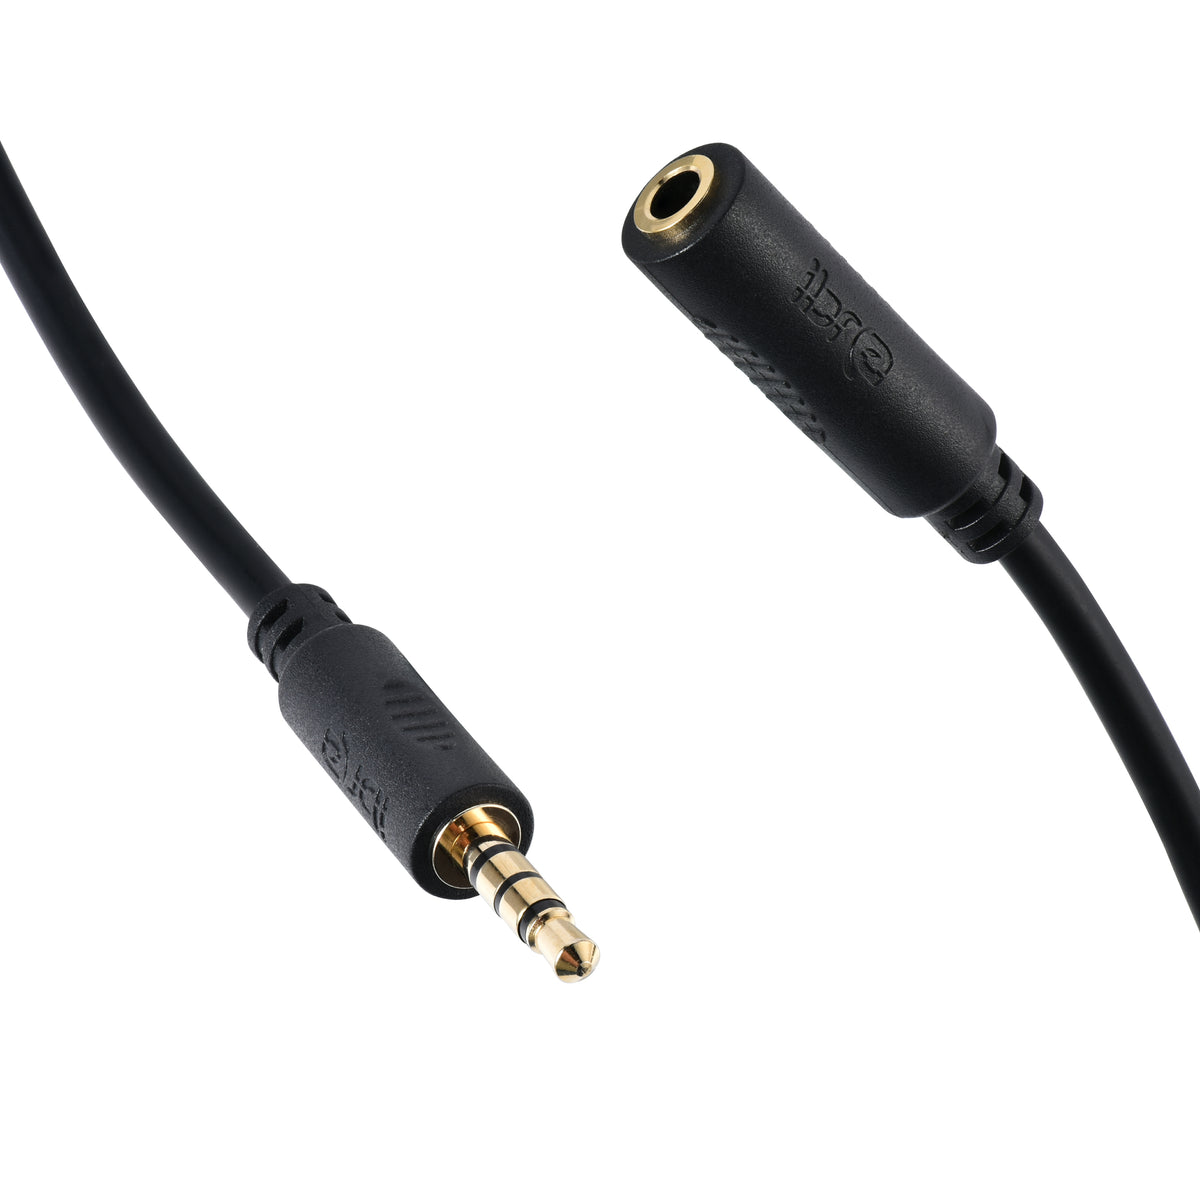 IBRA Headphone Extension Cable 0.5M Aux Stereo Jack Lead 3.5mm Male to Female Audio Cable Earphone Extender Cord Compatible With Laptop PC iPhone iPad Tablet Headset TV PS4 Speaker Smartphone-Black